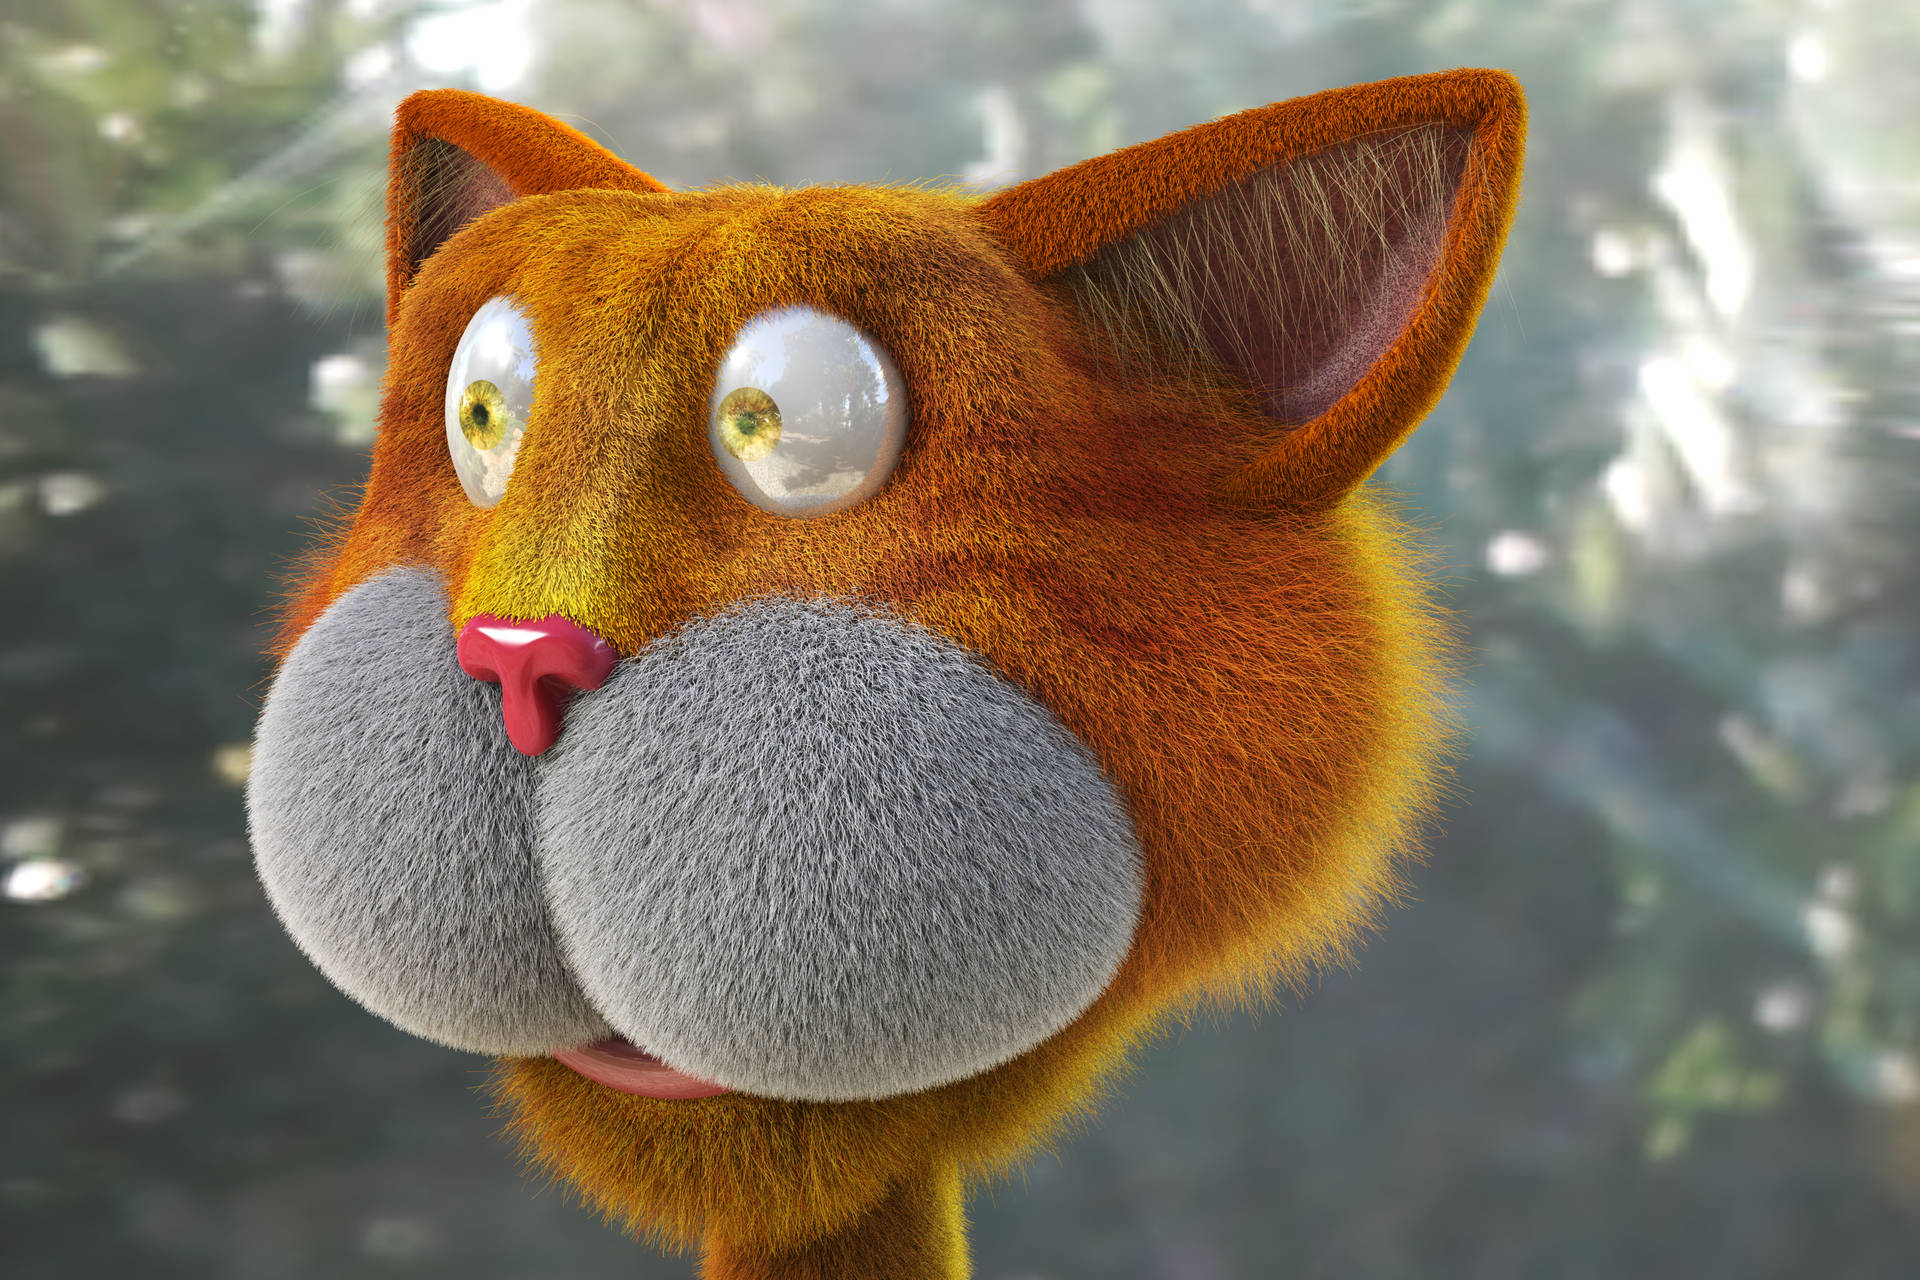 This Adorably Lifelike 3d Orange Cat Will Brighten Your Day!